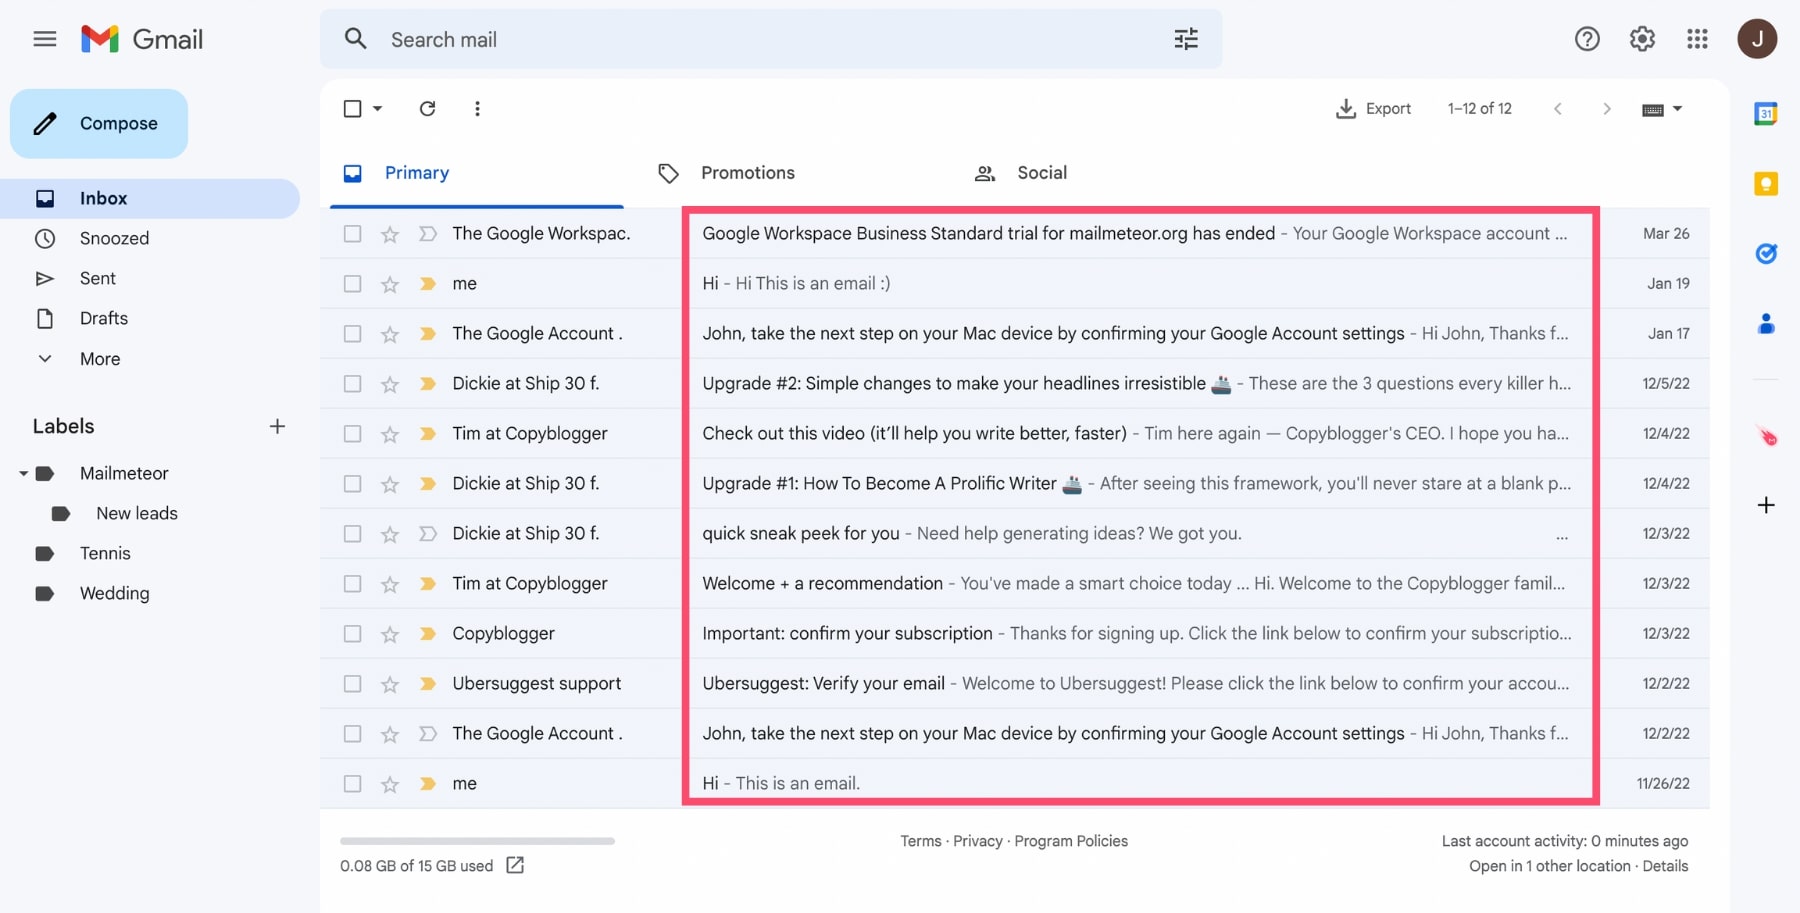 Email subject line examples in Gmail